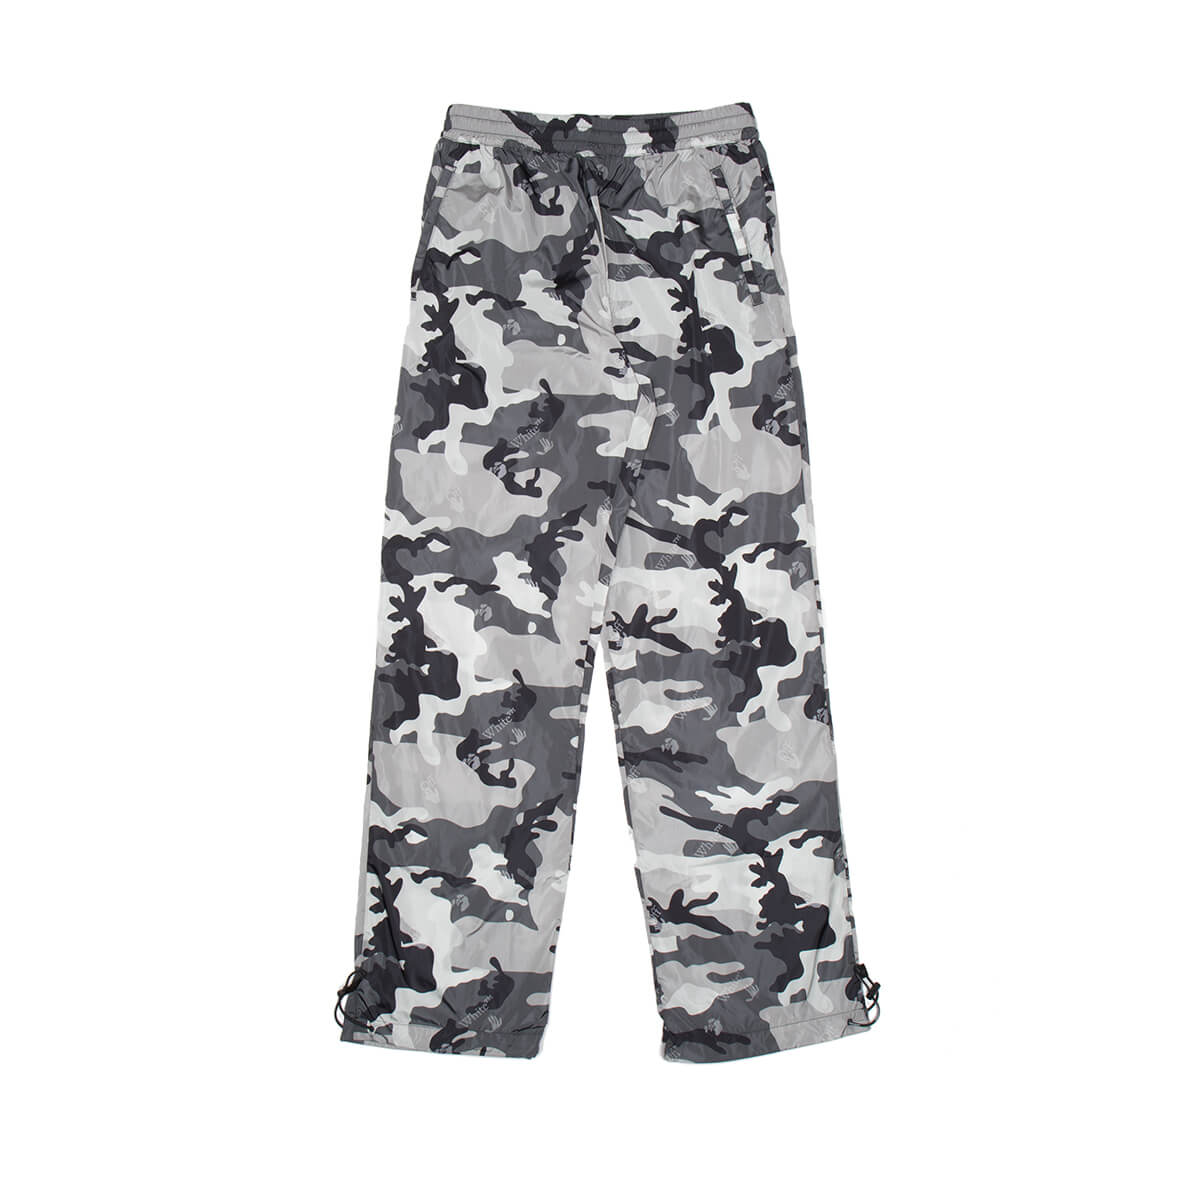 OFF-WHITE TECHNICAL CAMOUFLAGE PANTS,OMCJ008S21FAB0010900 Grey